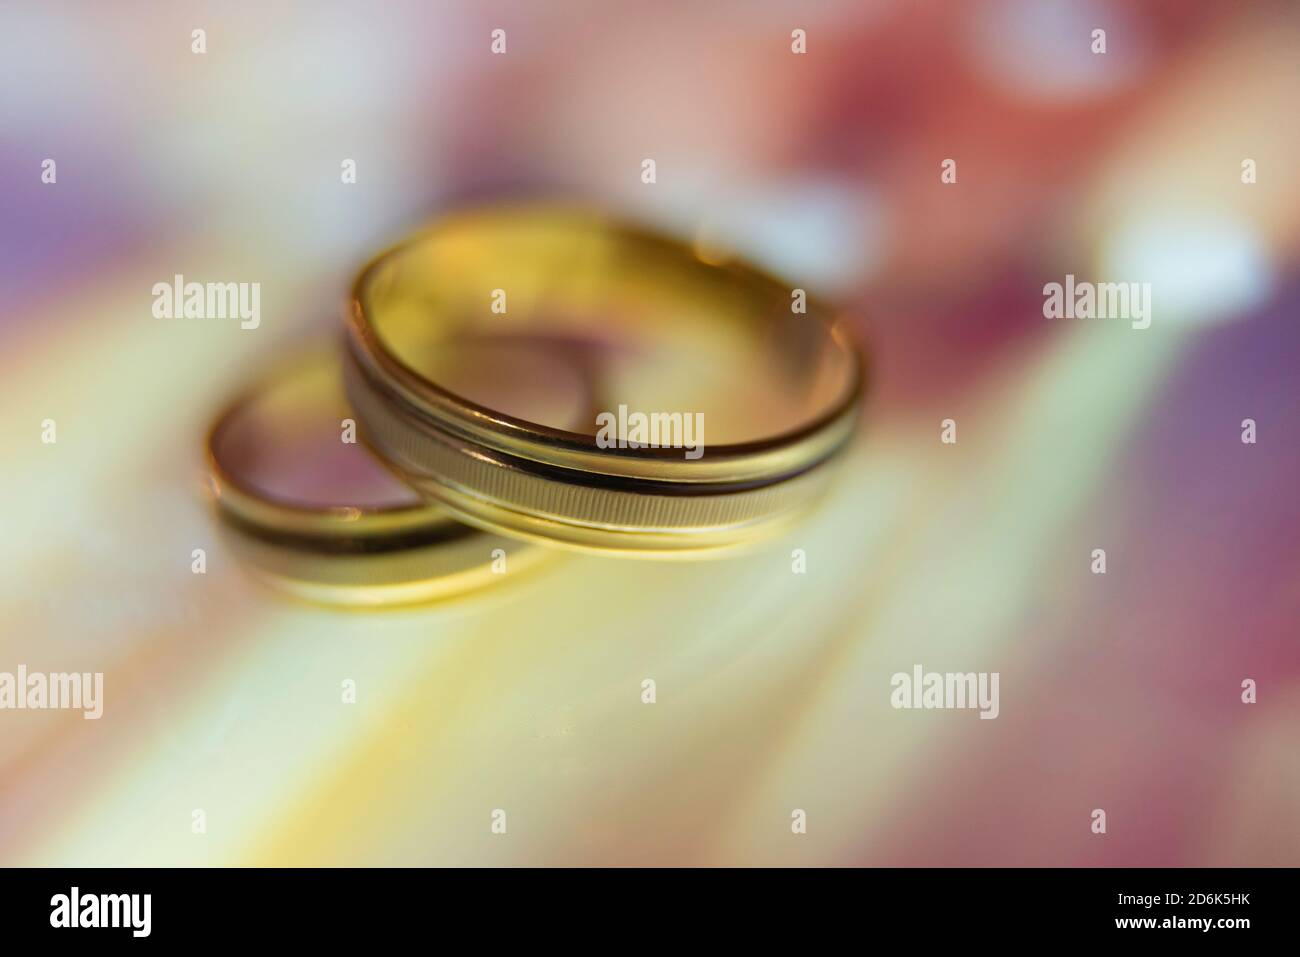 wedding rings in warm colors with reflection Stock Photo